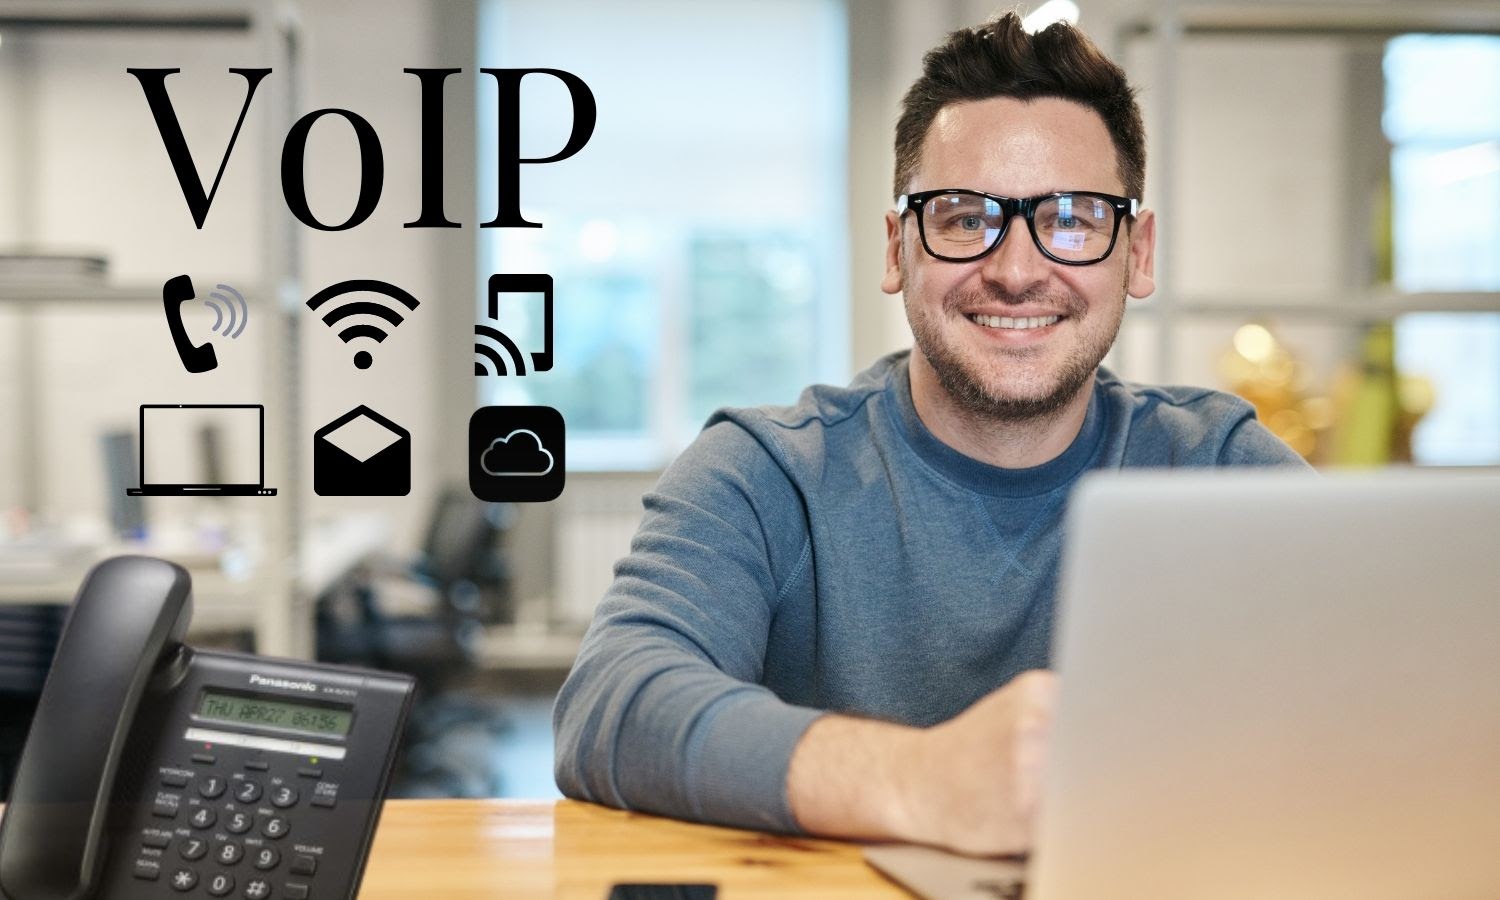 Awesome Facts About VOIP That Can Help Your Business Grow